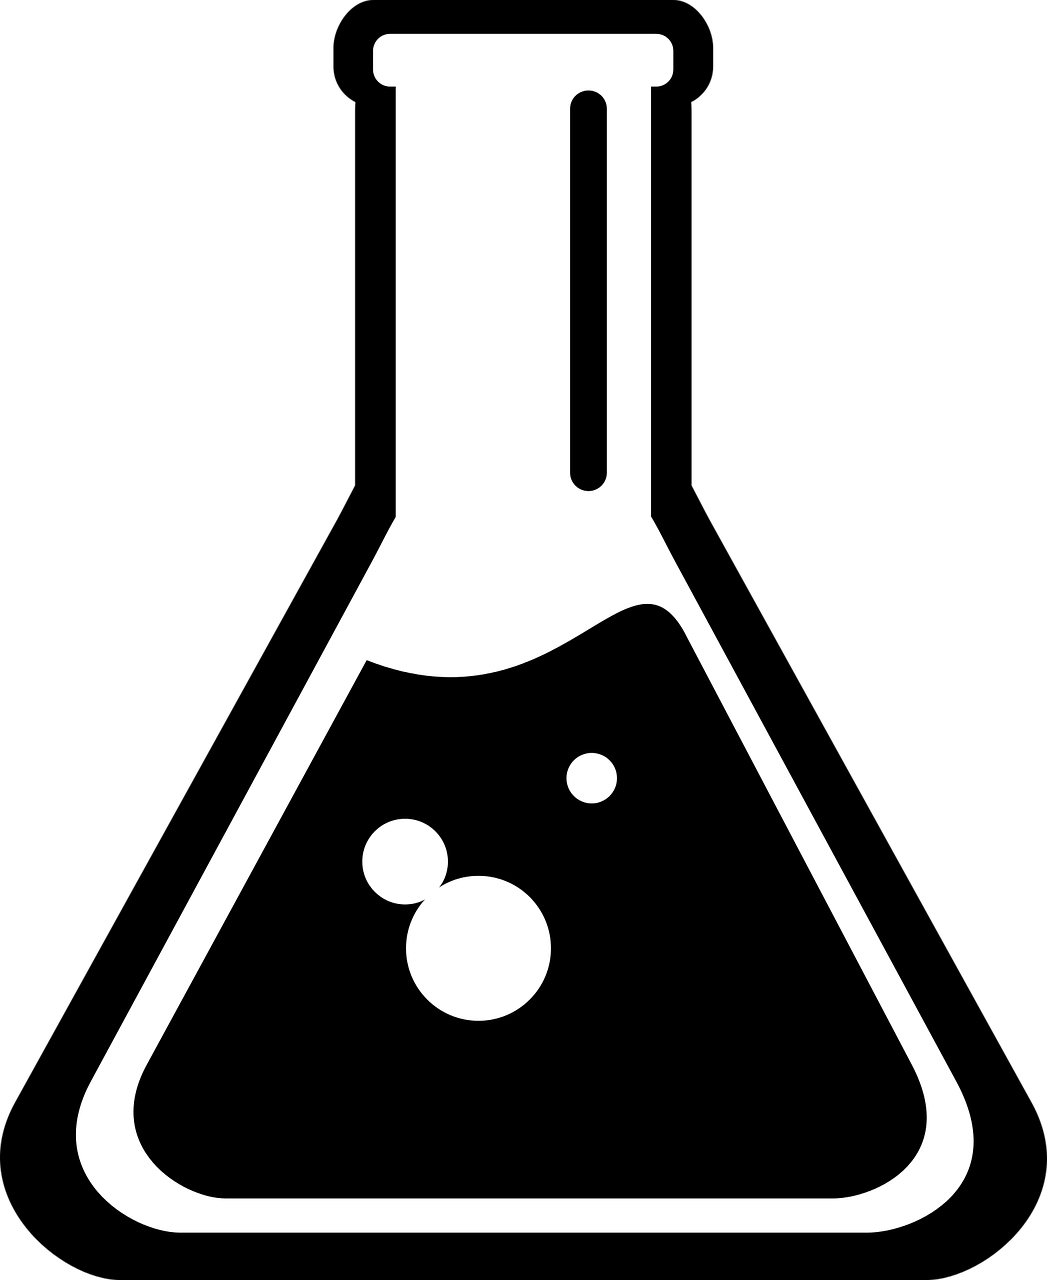 Chemical,science,science icon,free vector graphics,free pictures ...